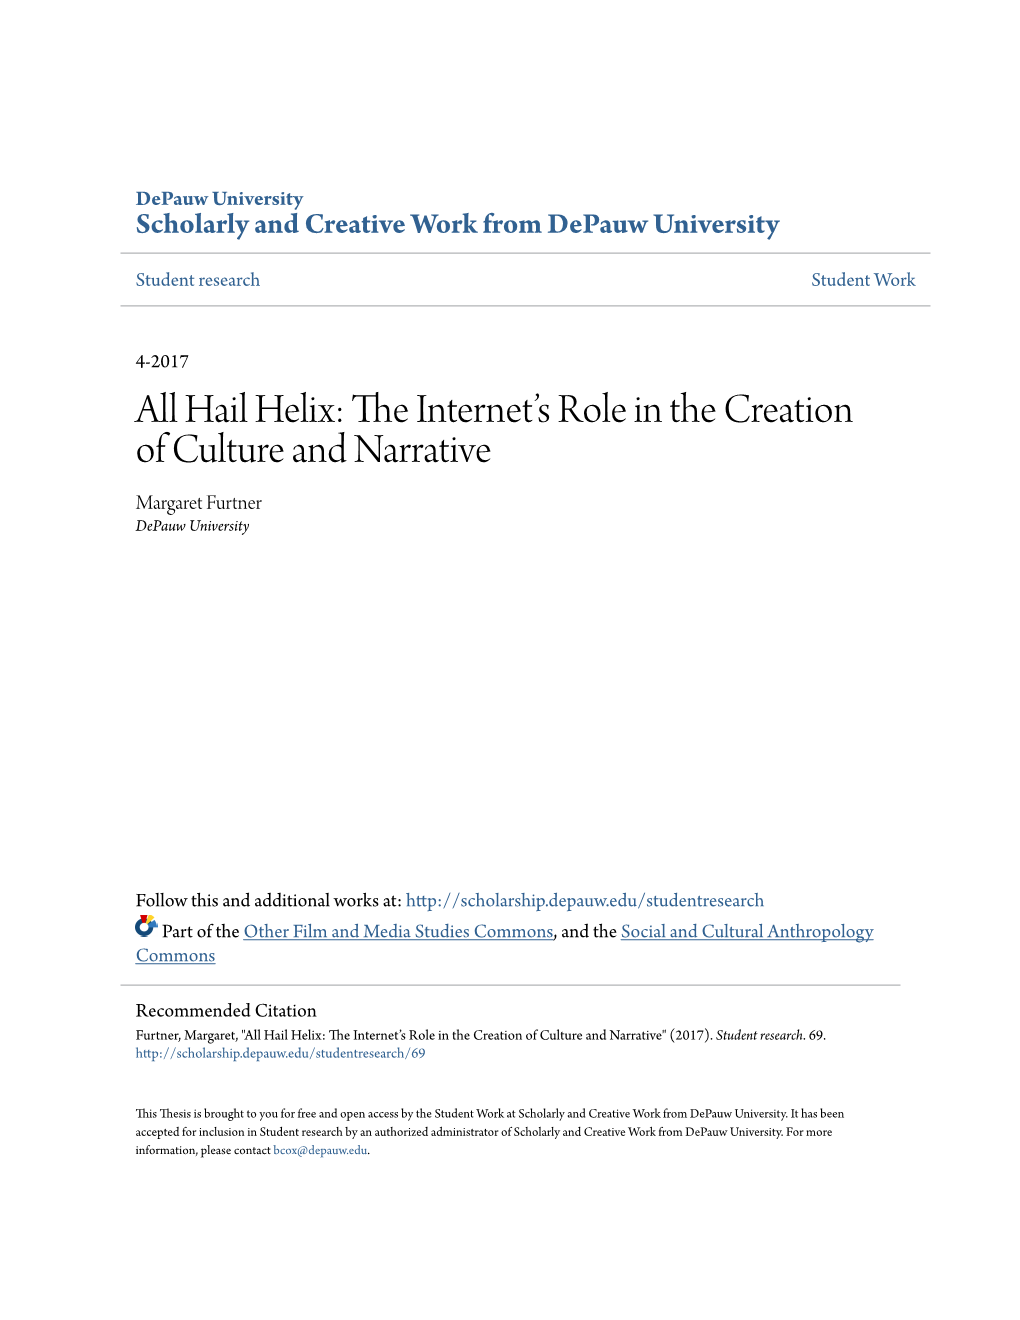 Hail Helix: the Ni Ternet’S Role in the Creation of Culture and Narrative Margaret Furtner Depauw University